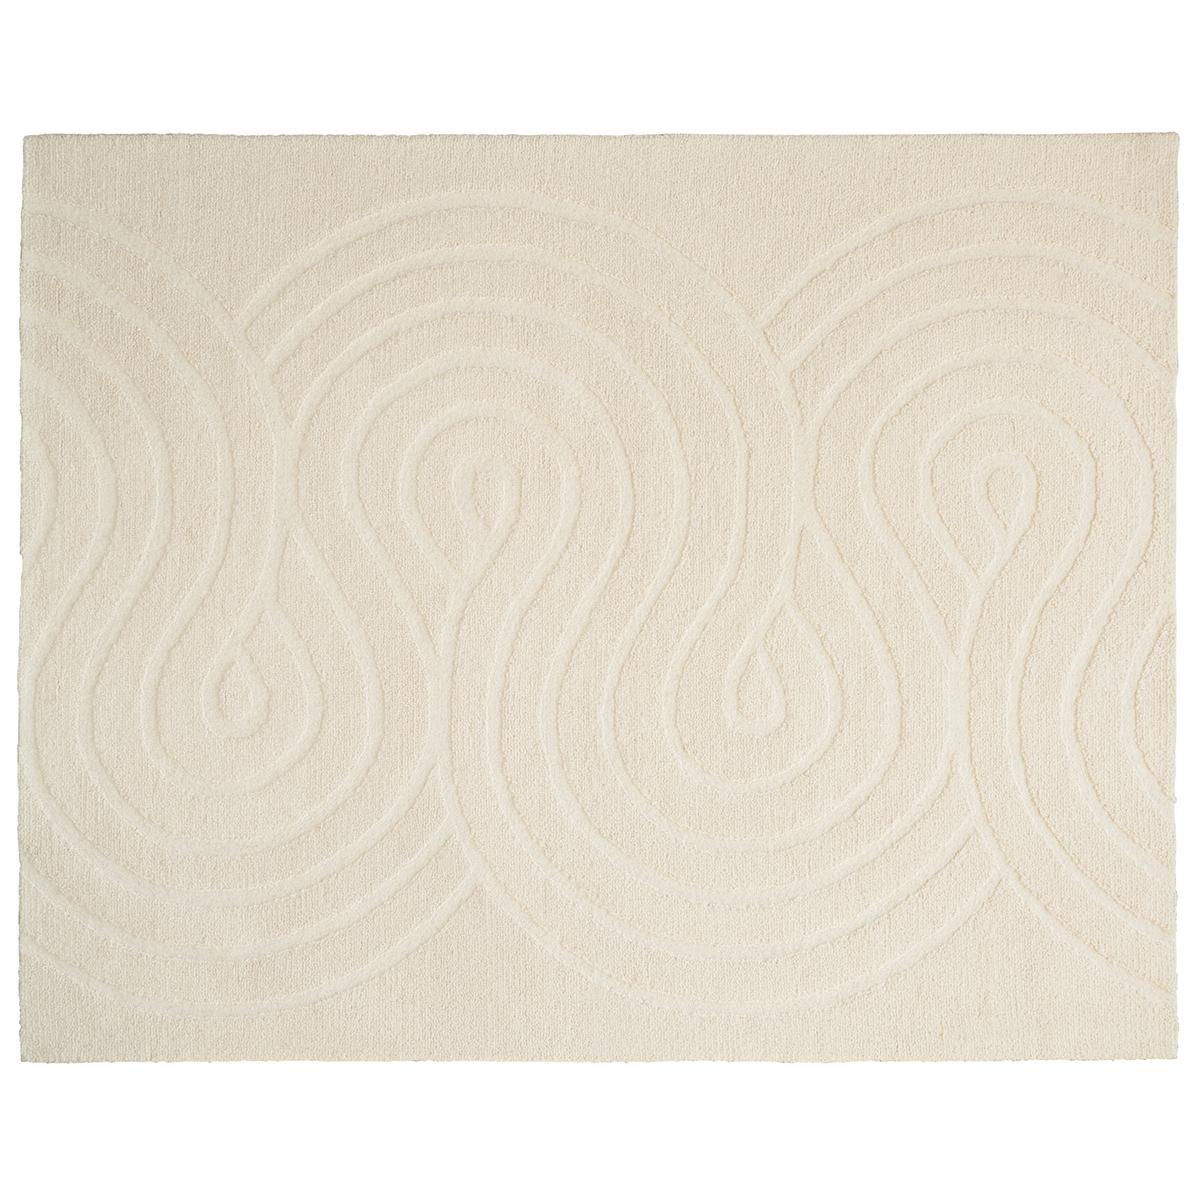 Hand tufted and made of 100% wool, Giraldi is a beautifully crafted, textural design with a winding serpentine pattern. Soft and subtle yet graphic and modern, this rug makes an elegant statement in any room.